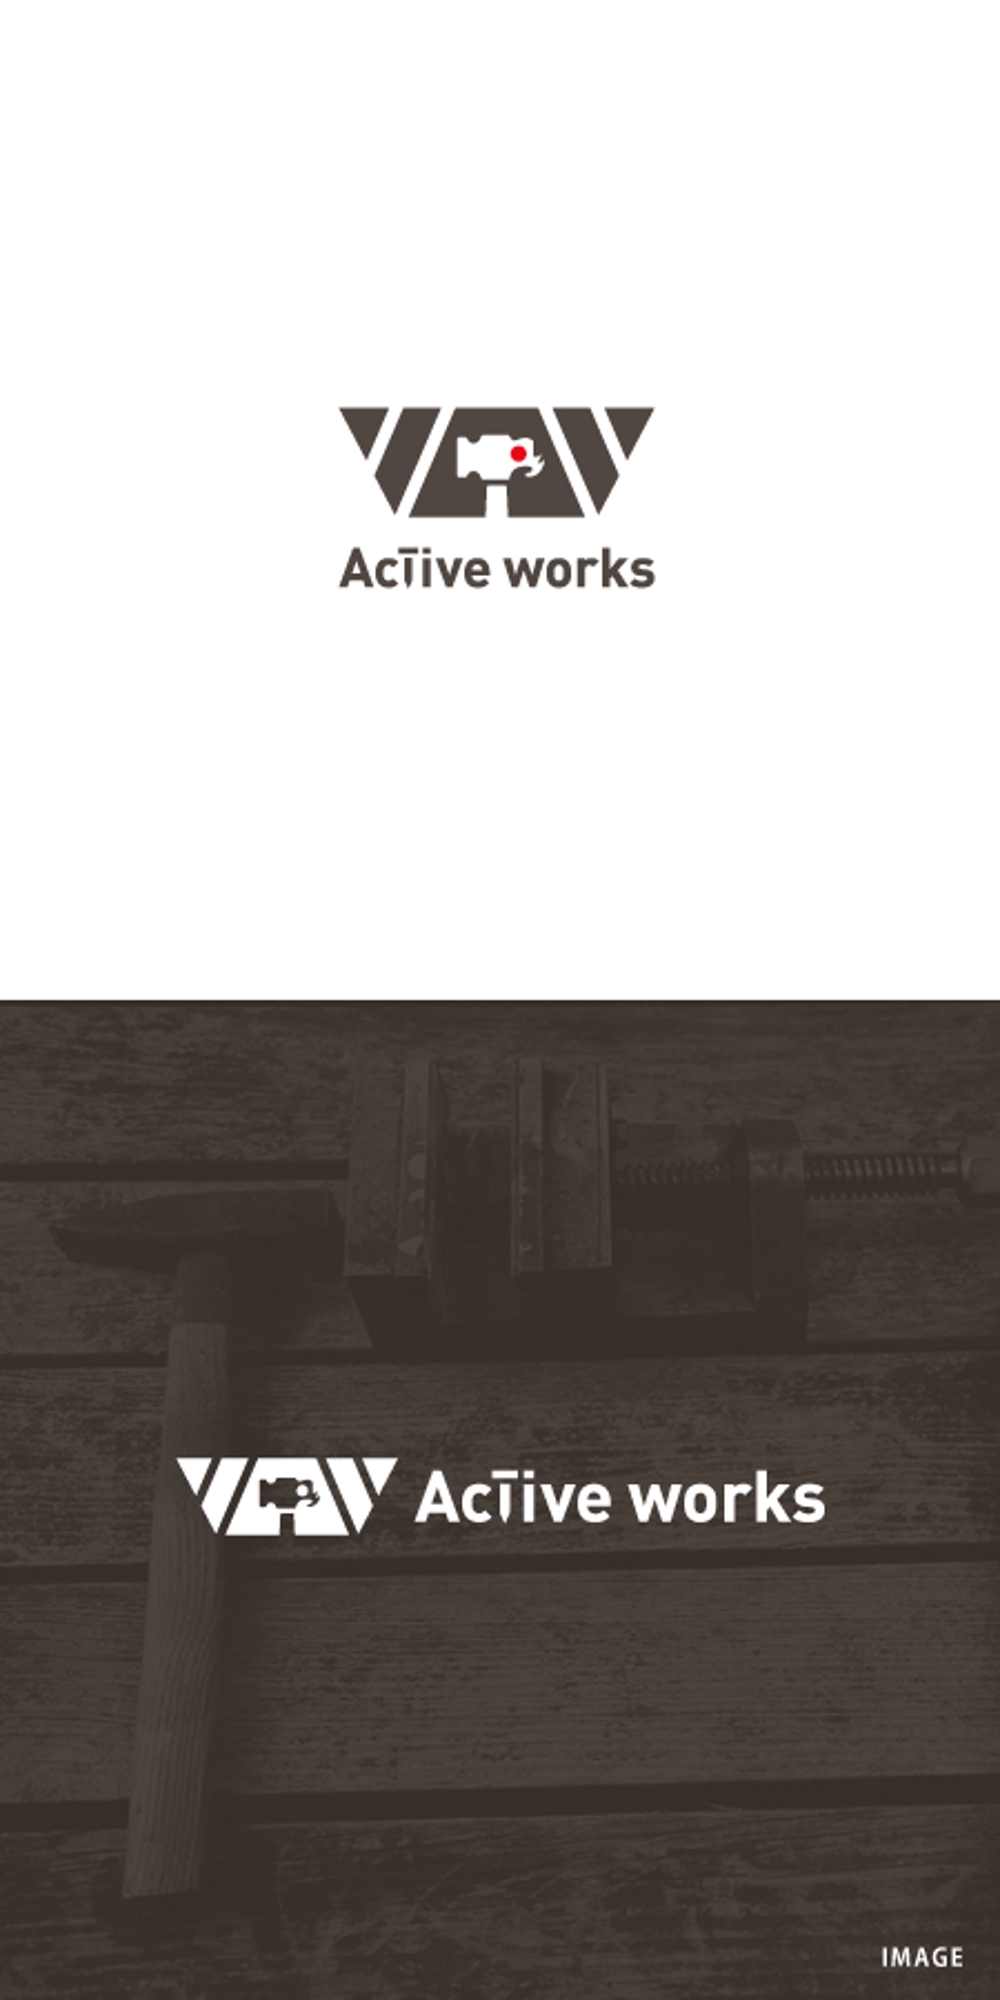 activeworks_1a.jpg